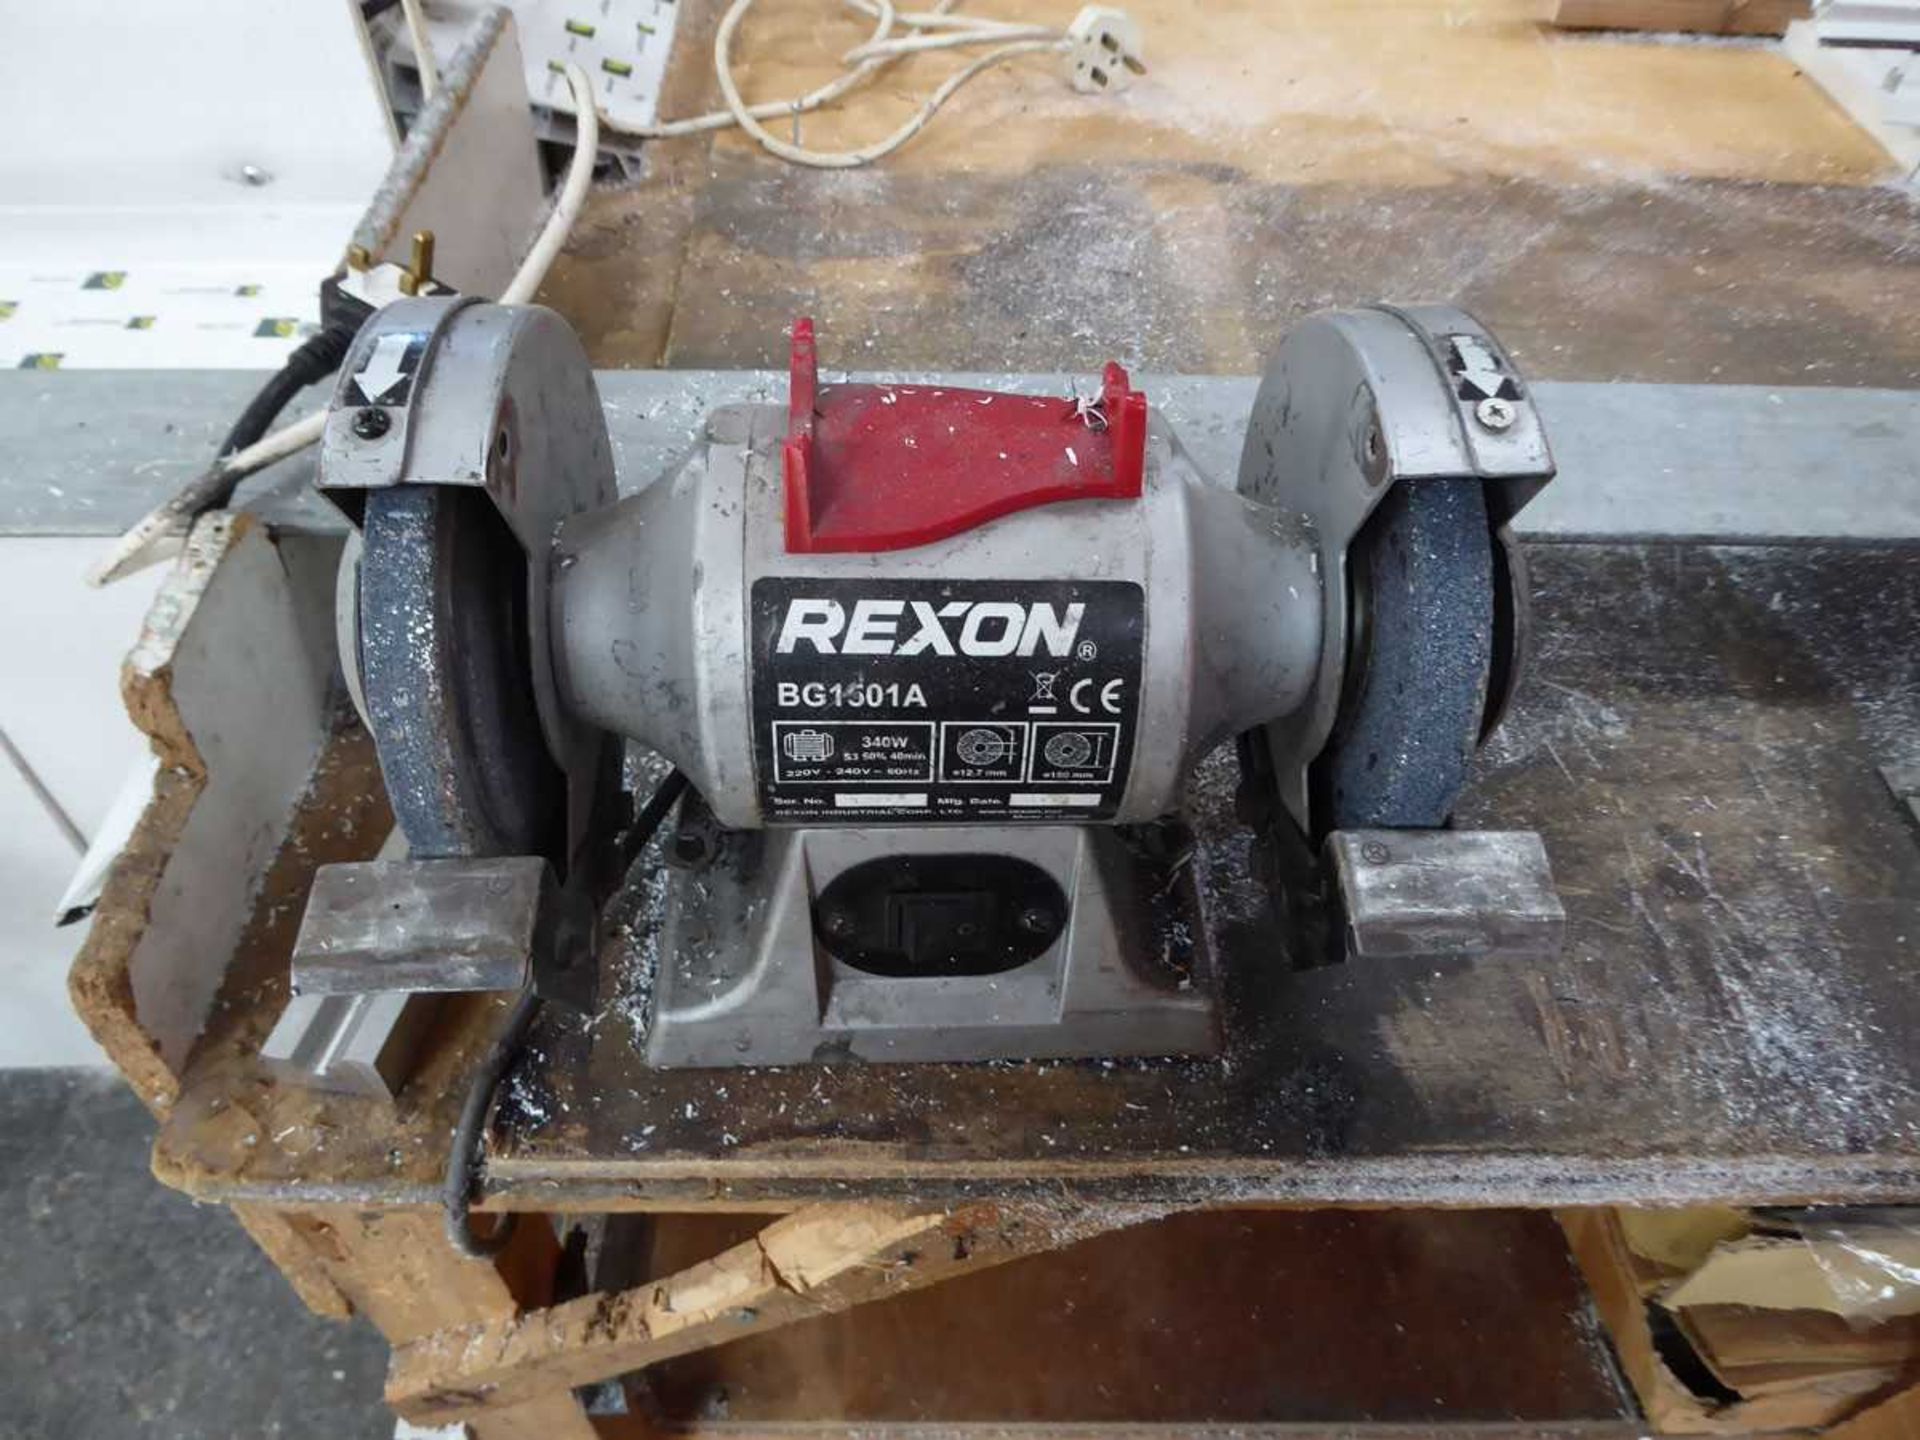 Rexon BG1501A double-ended bench grinder together with a Record 4" engineers vice - Image 2 of 2